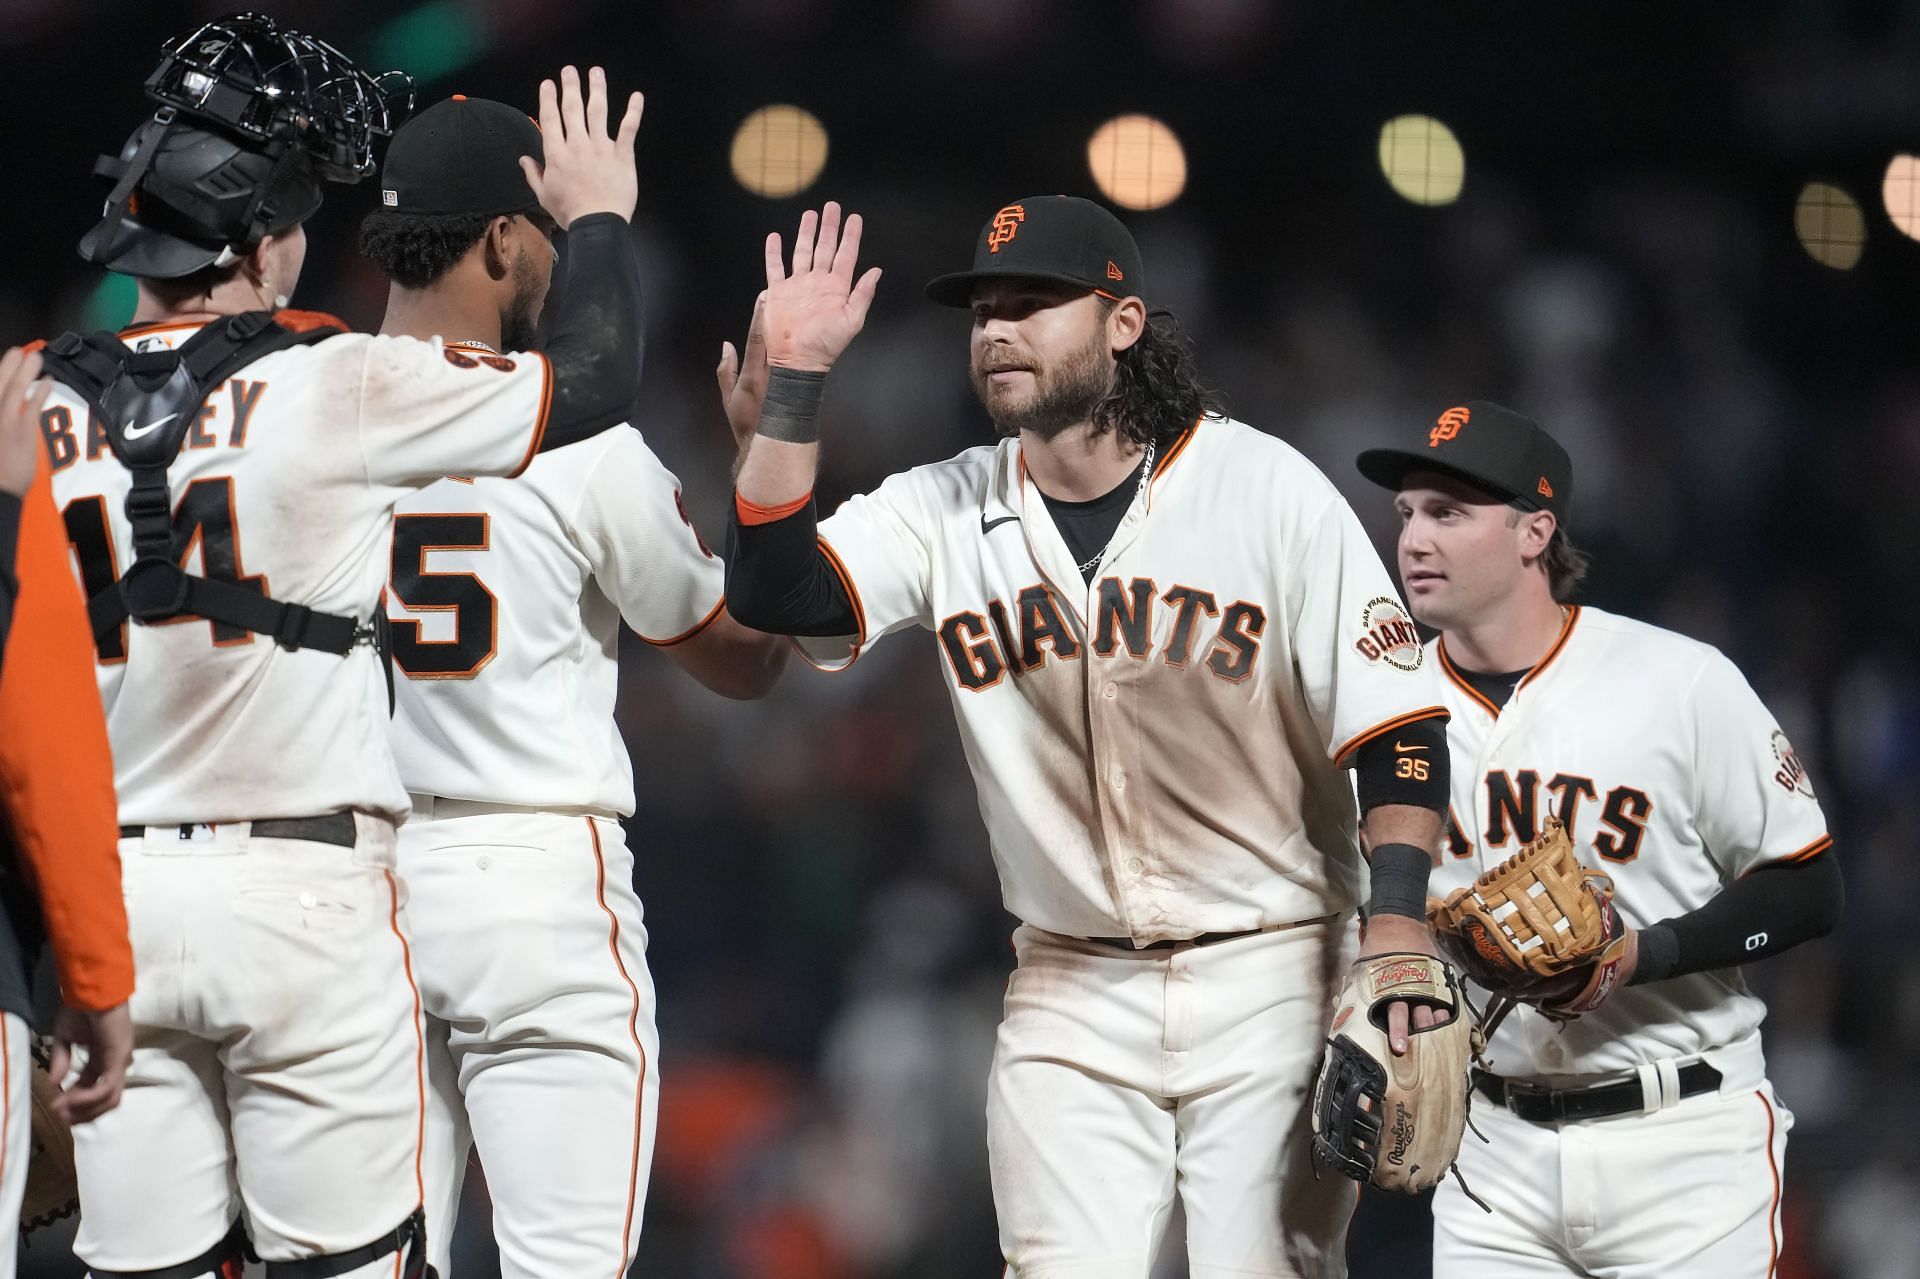 Cruise Sponsorship Patch Now Part of Giants' Jerseys